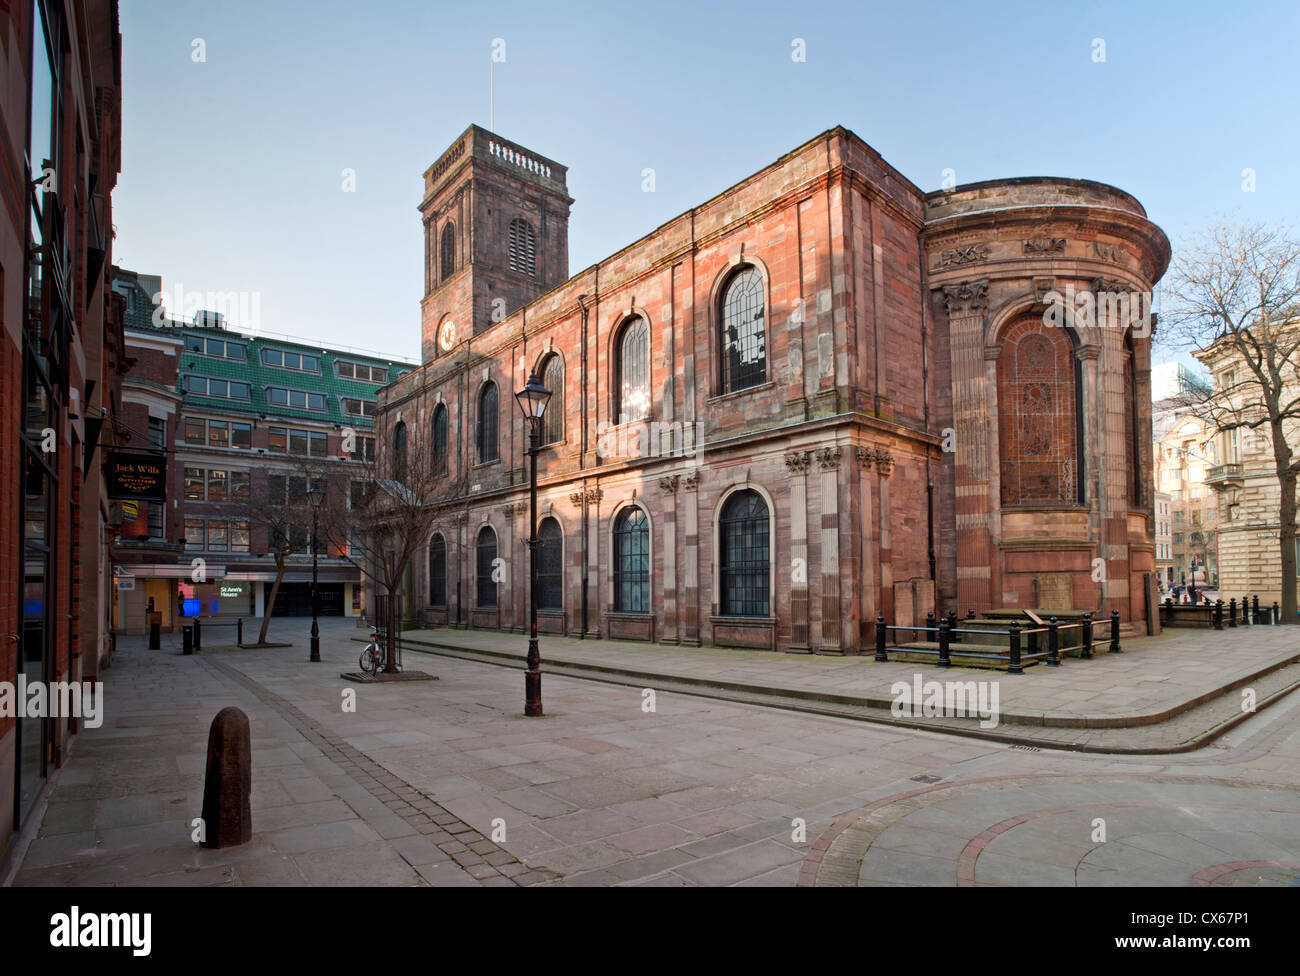 St Annes Cathedral, St. Annes Square, Manchester City Centre, Manchester, England, UK Stockfoto